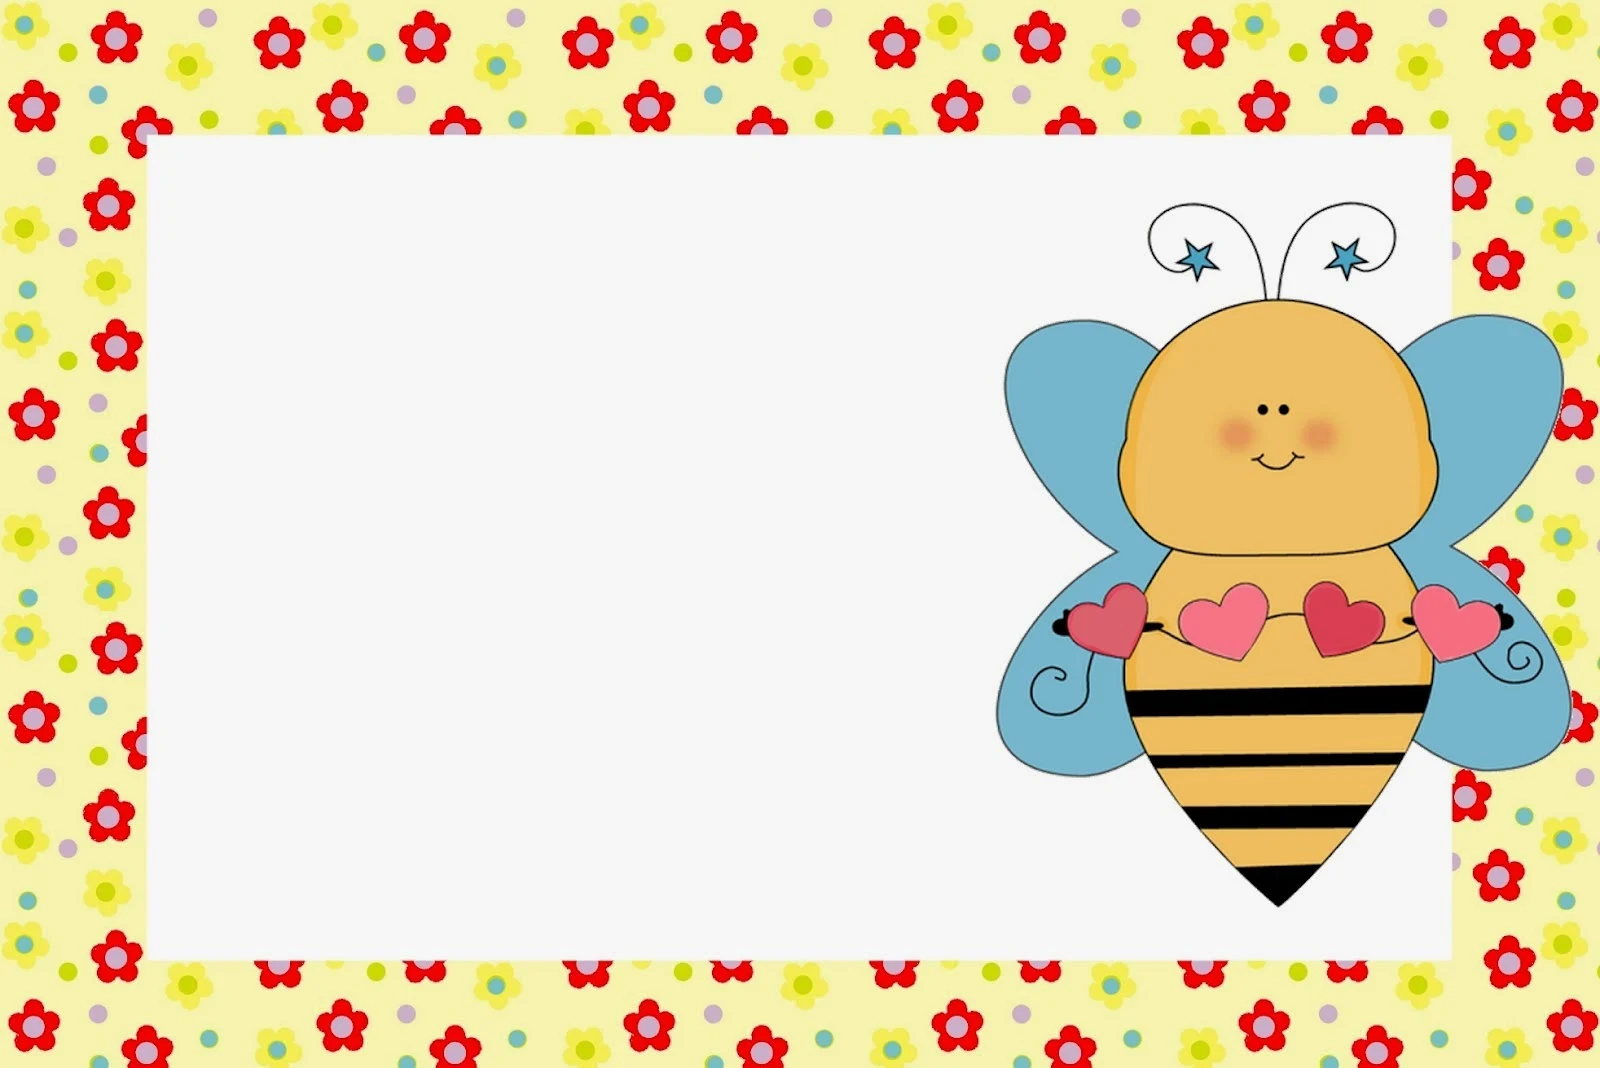 Bees Free Printable Invitations, Labels or Cards.